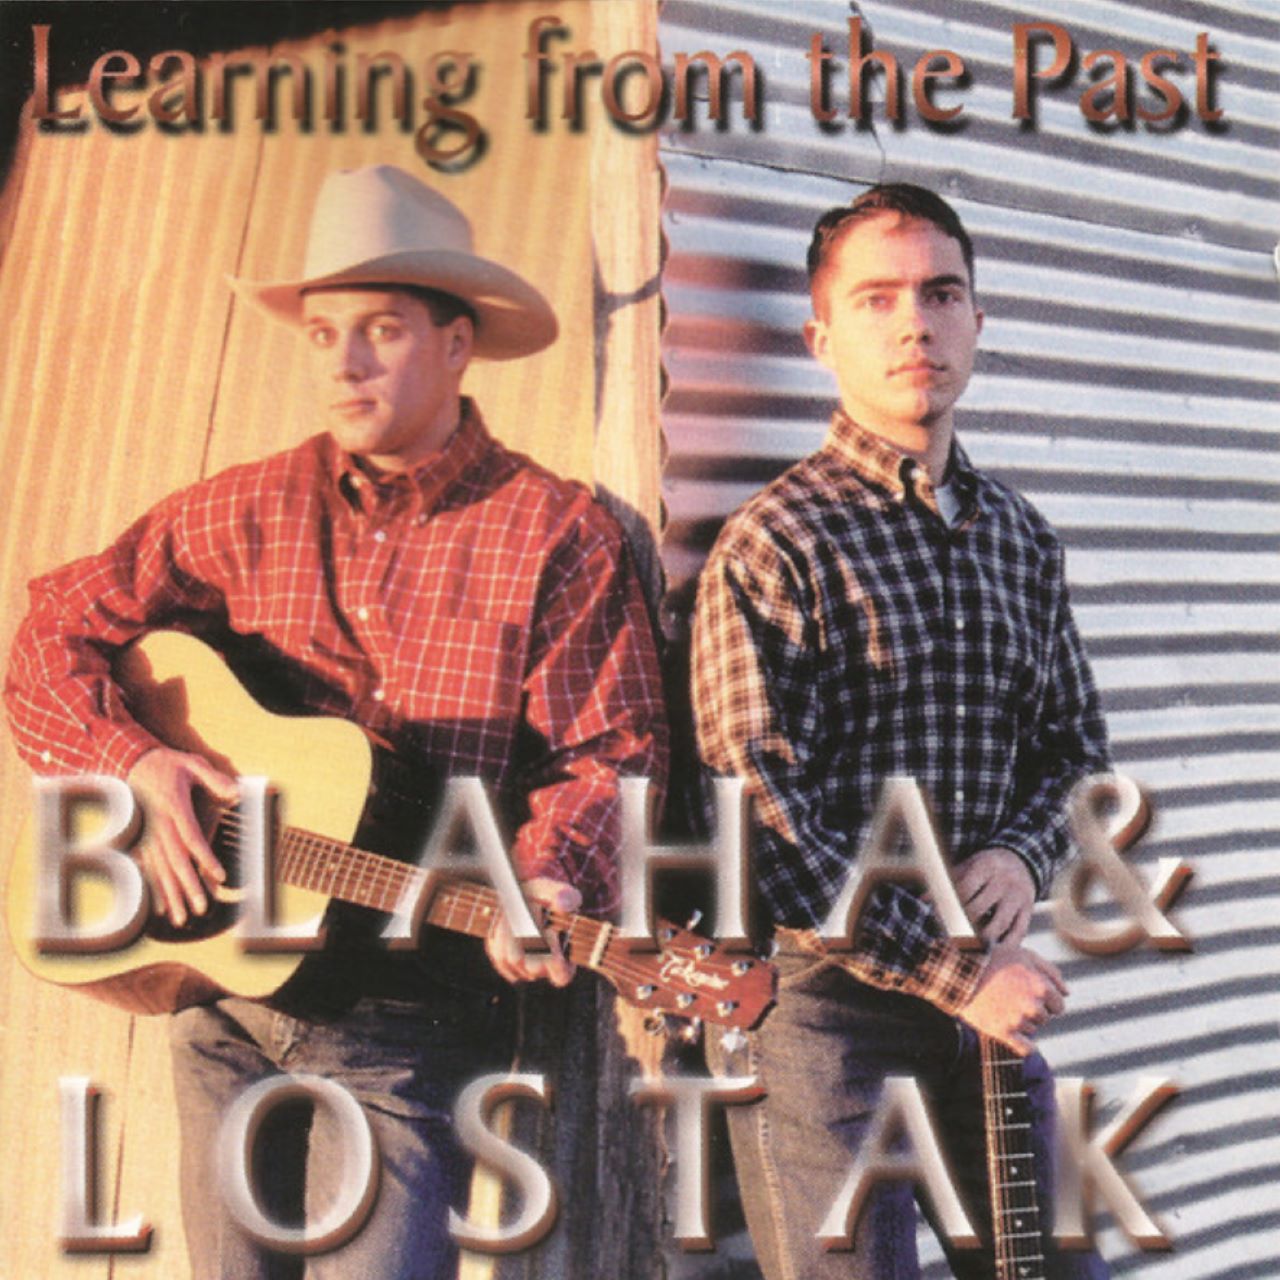 Blaha & Lostak – Learning From The Past cover album